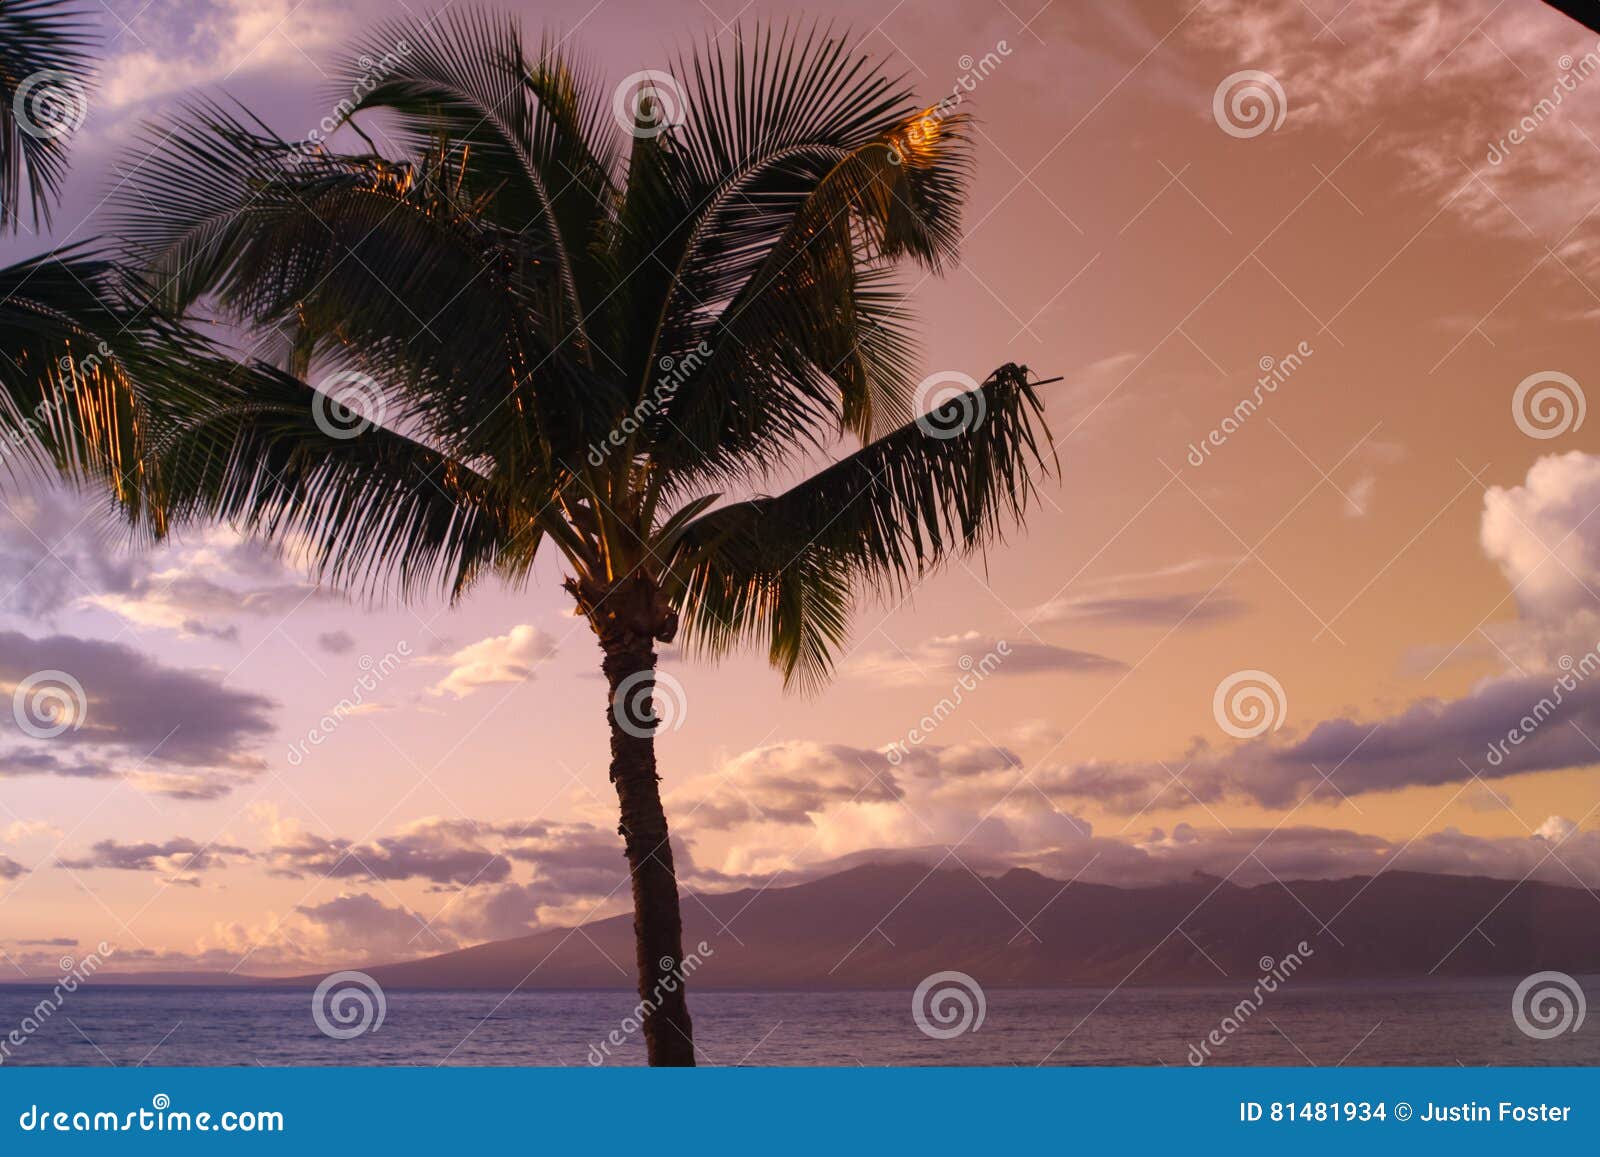 Palm Tree Silhouette Against Blue And Yellow Sunset Sky Hawaii Stock